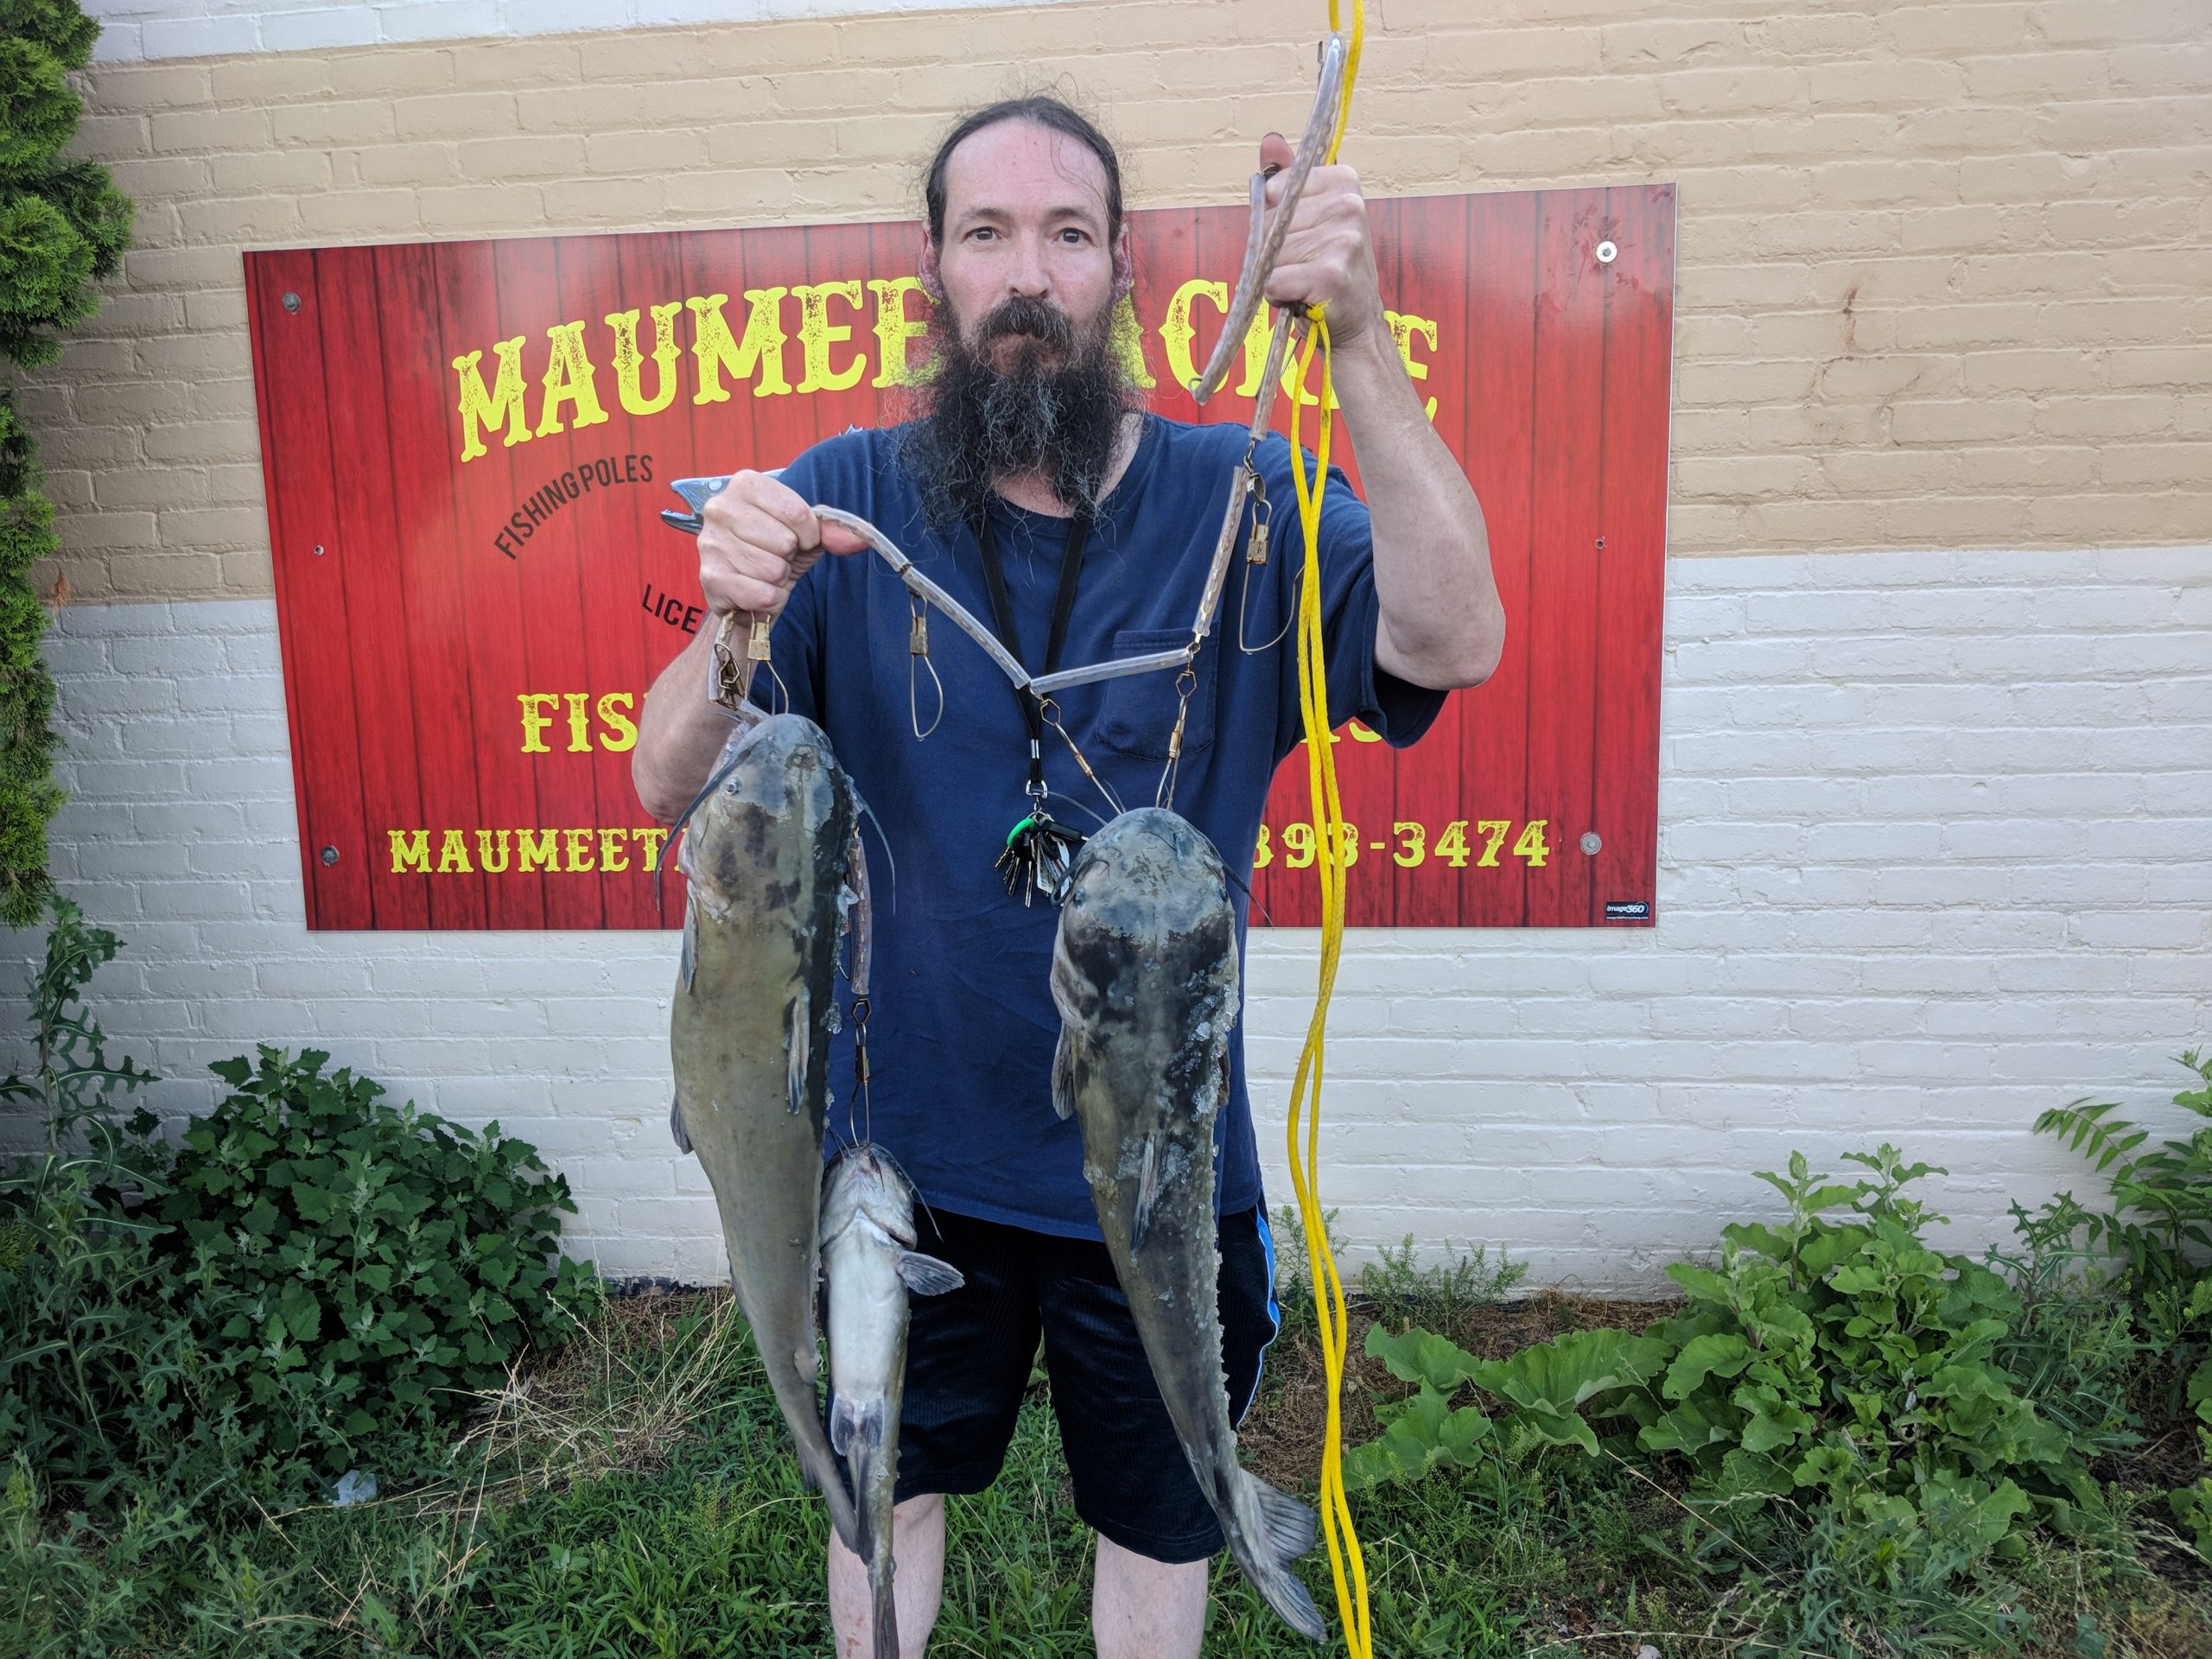 Maumee river report-june 26, 2020